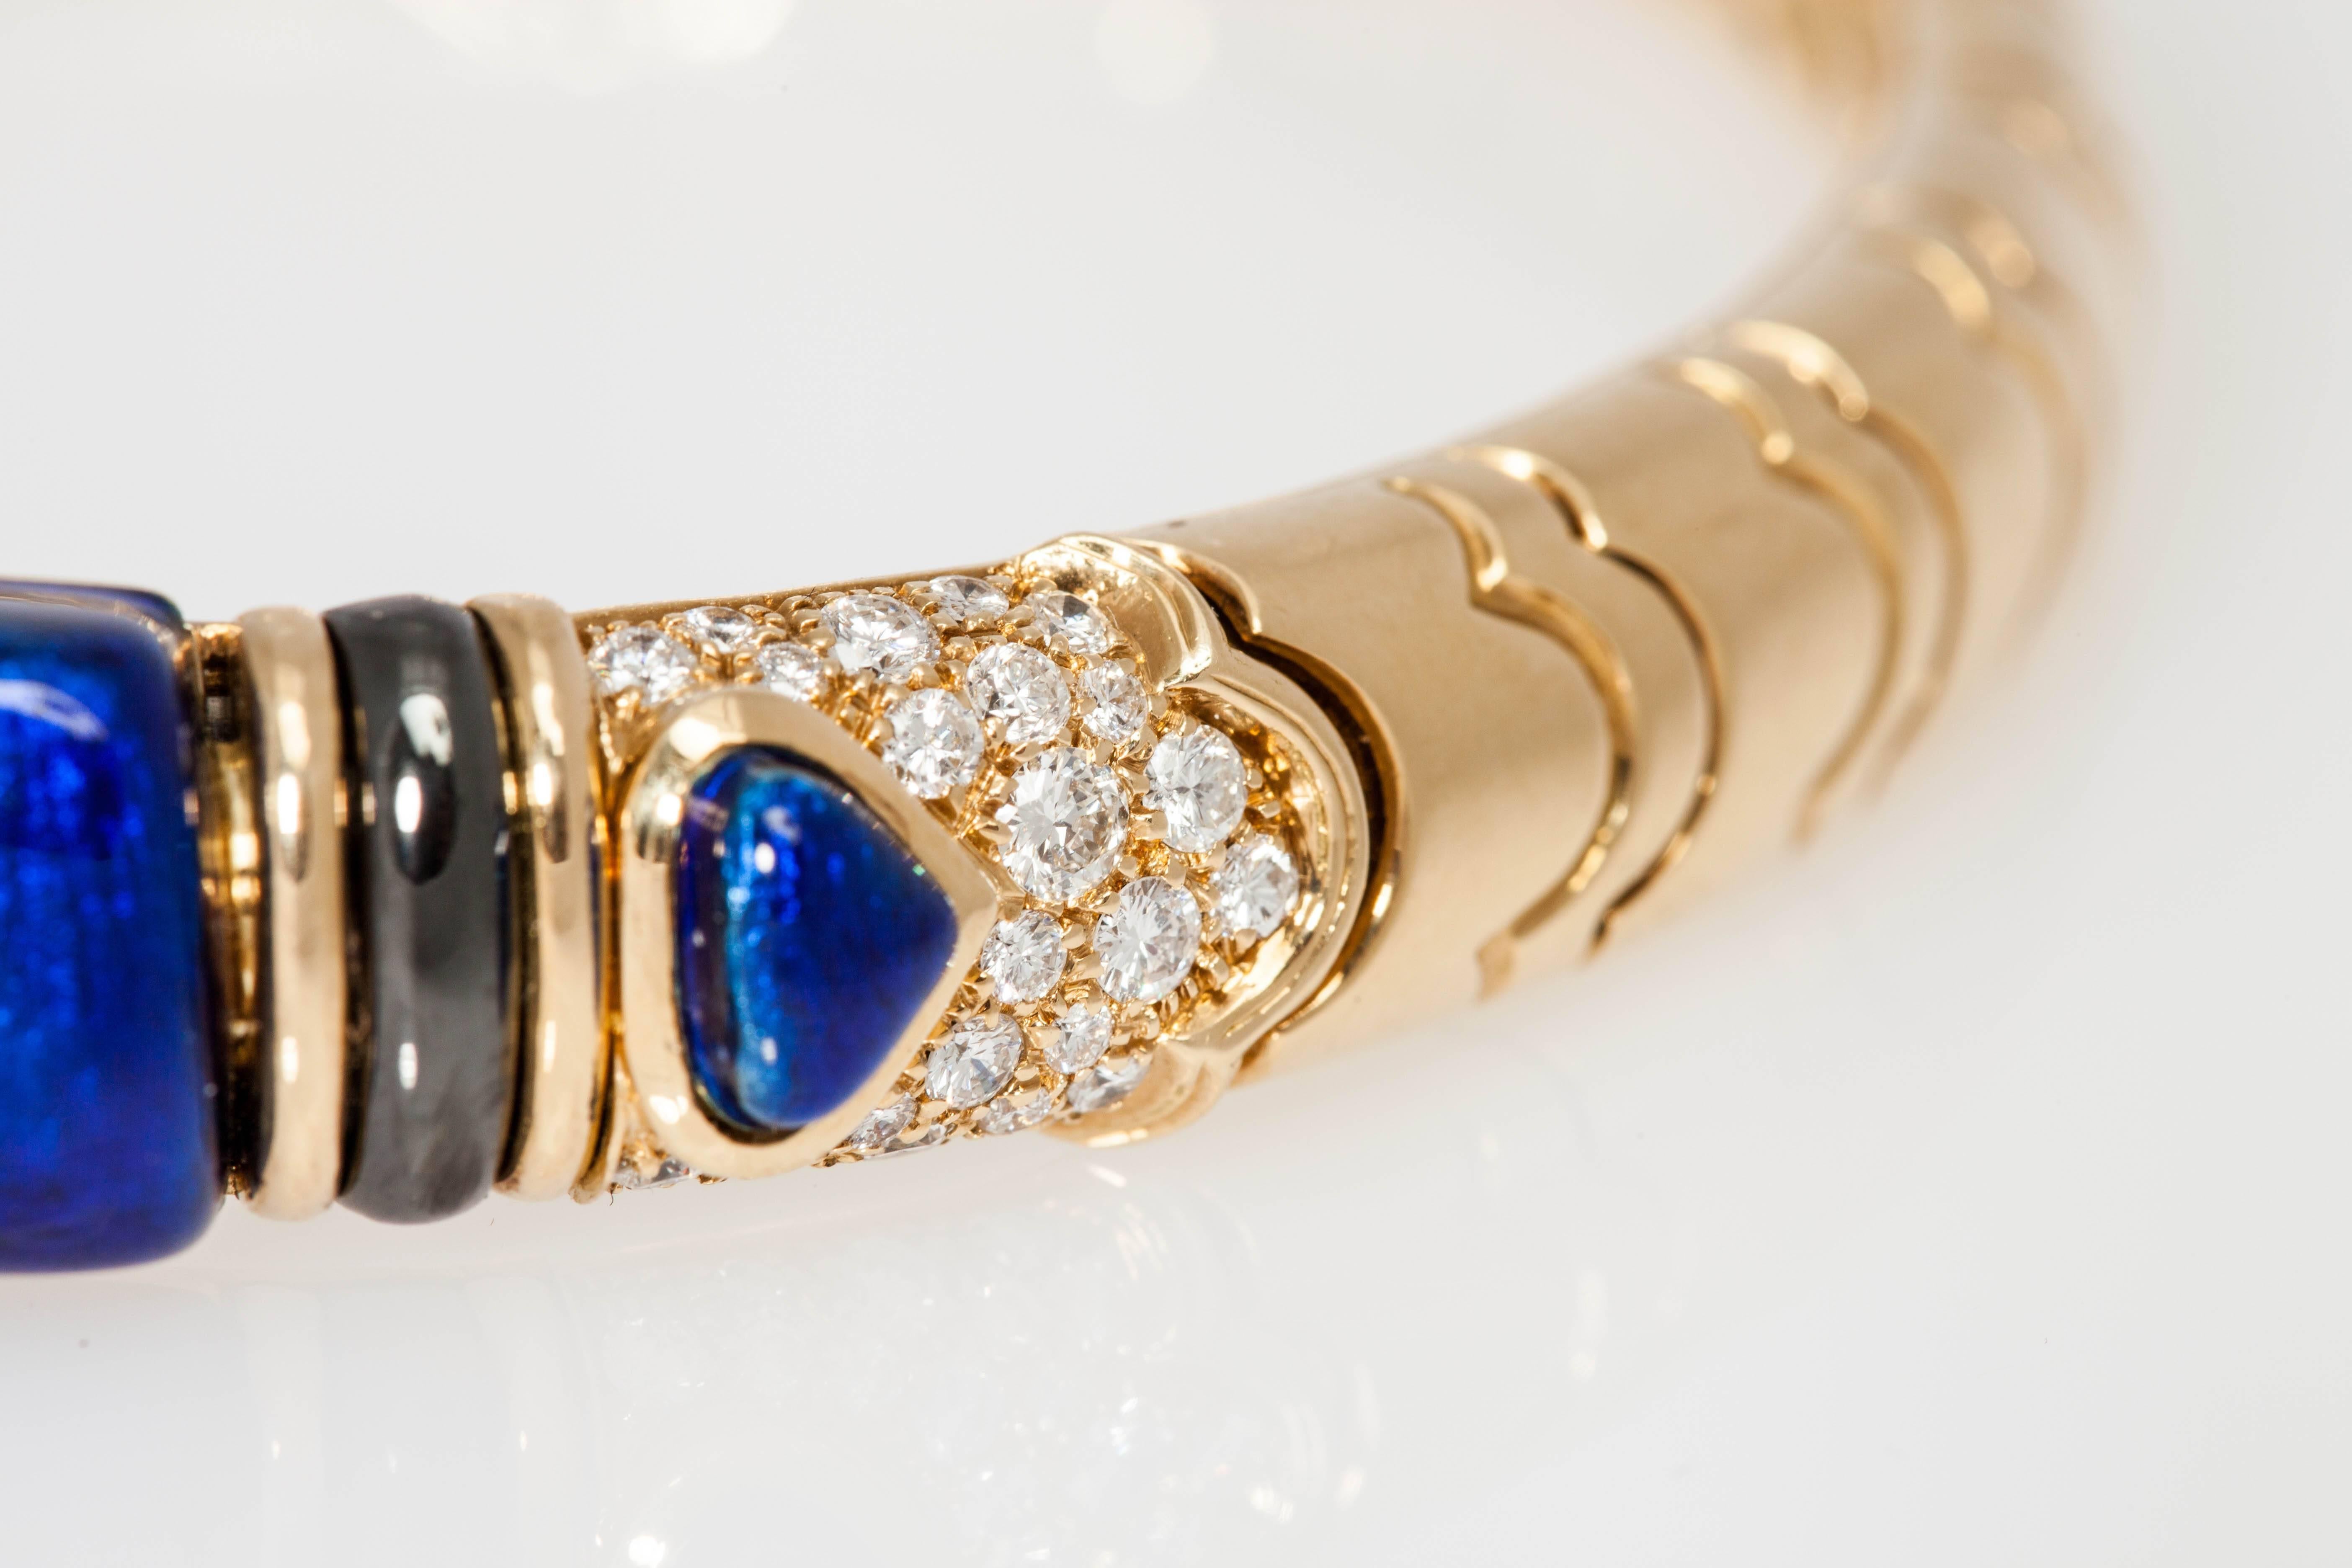 A sophisticated choker necklace by Marina B, with blue enamel, diamonds and hematite. Made in Italy, circa 1984.